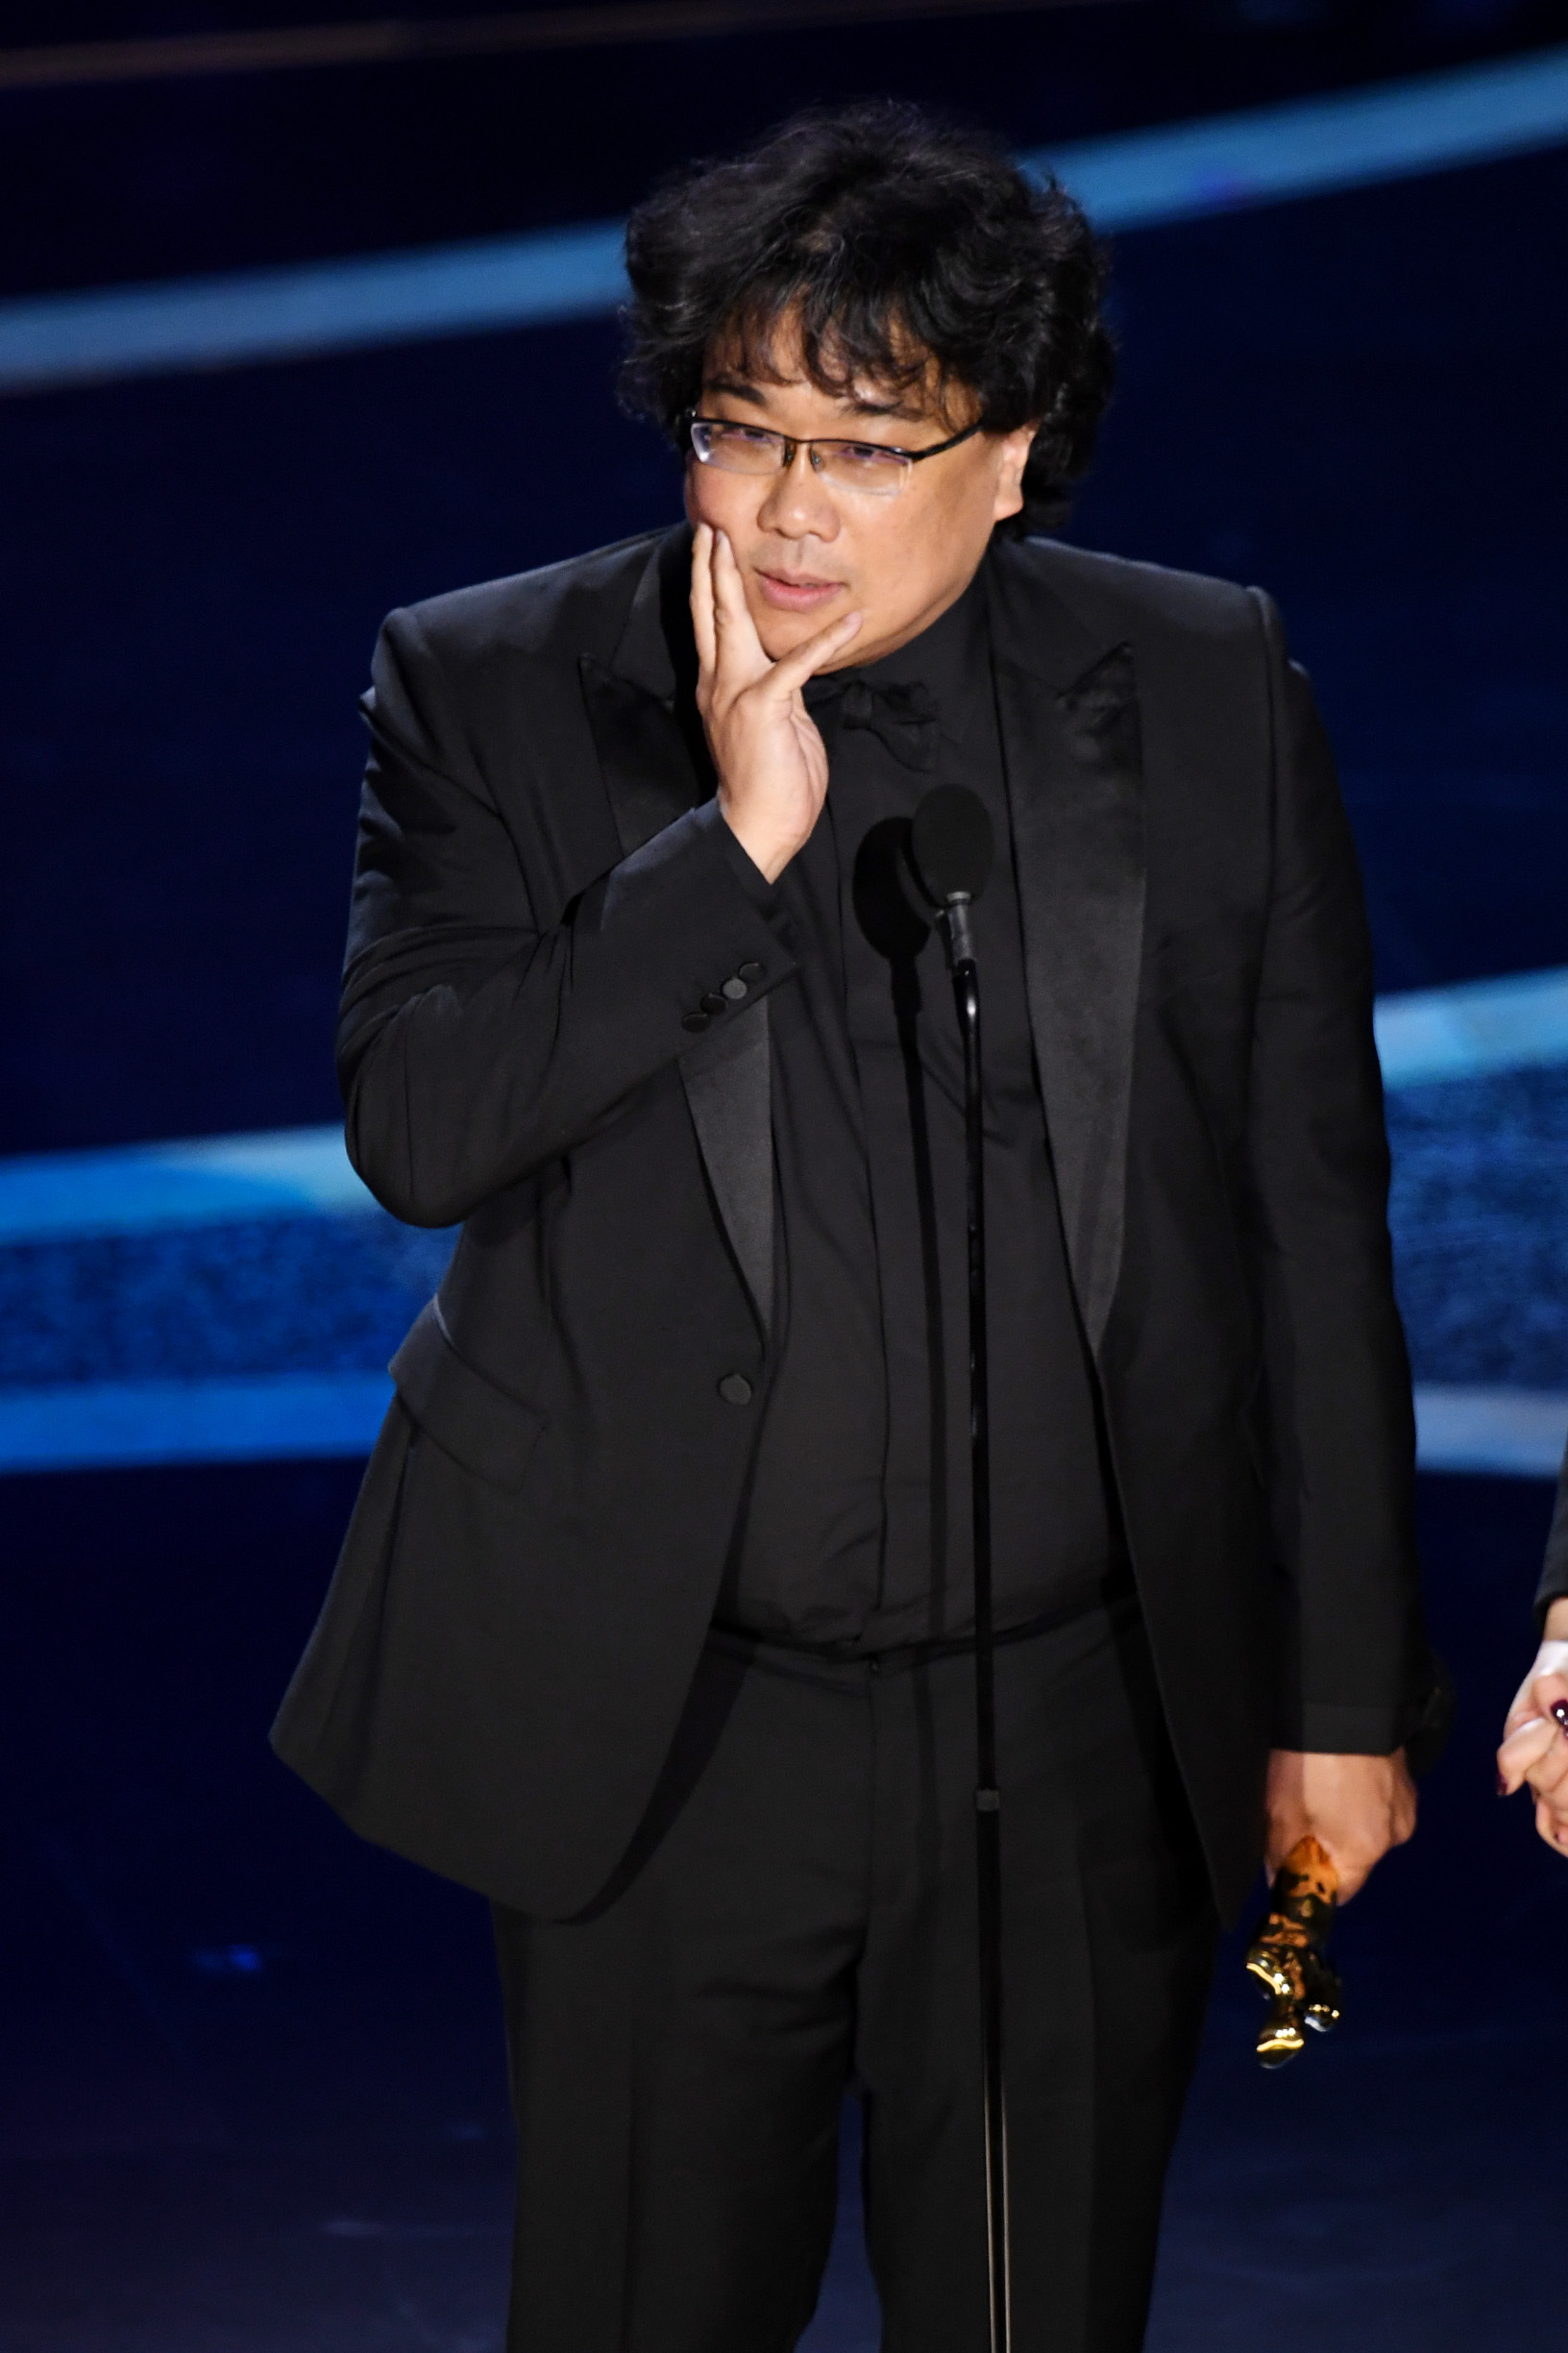 HOLLYWOOD, CALIFORNIA - FEBRUARY 09: Bong Joon-ho accepts the Directing award for 'Parasite' onstage during the 92nd Annual Academy Awards at Dolby Theatre on February 09, 2020 in Hollywood, California. (Photo by Kevin Winter/Getty Images)